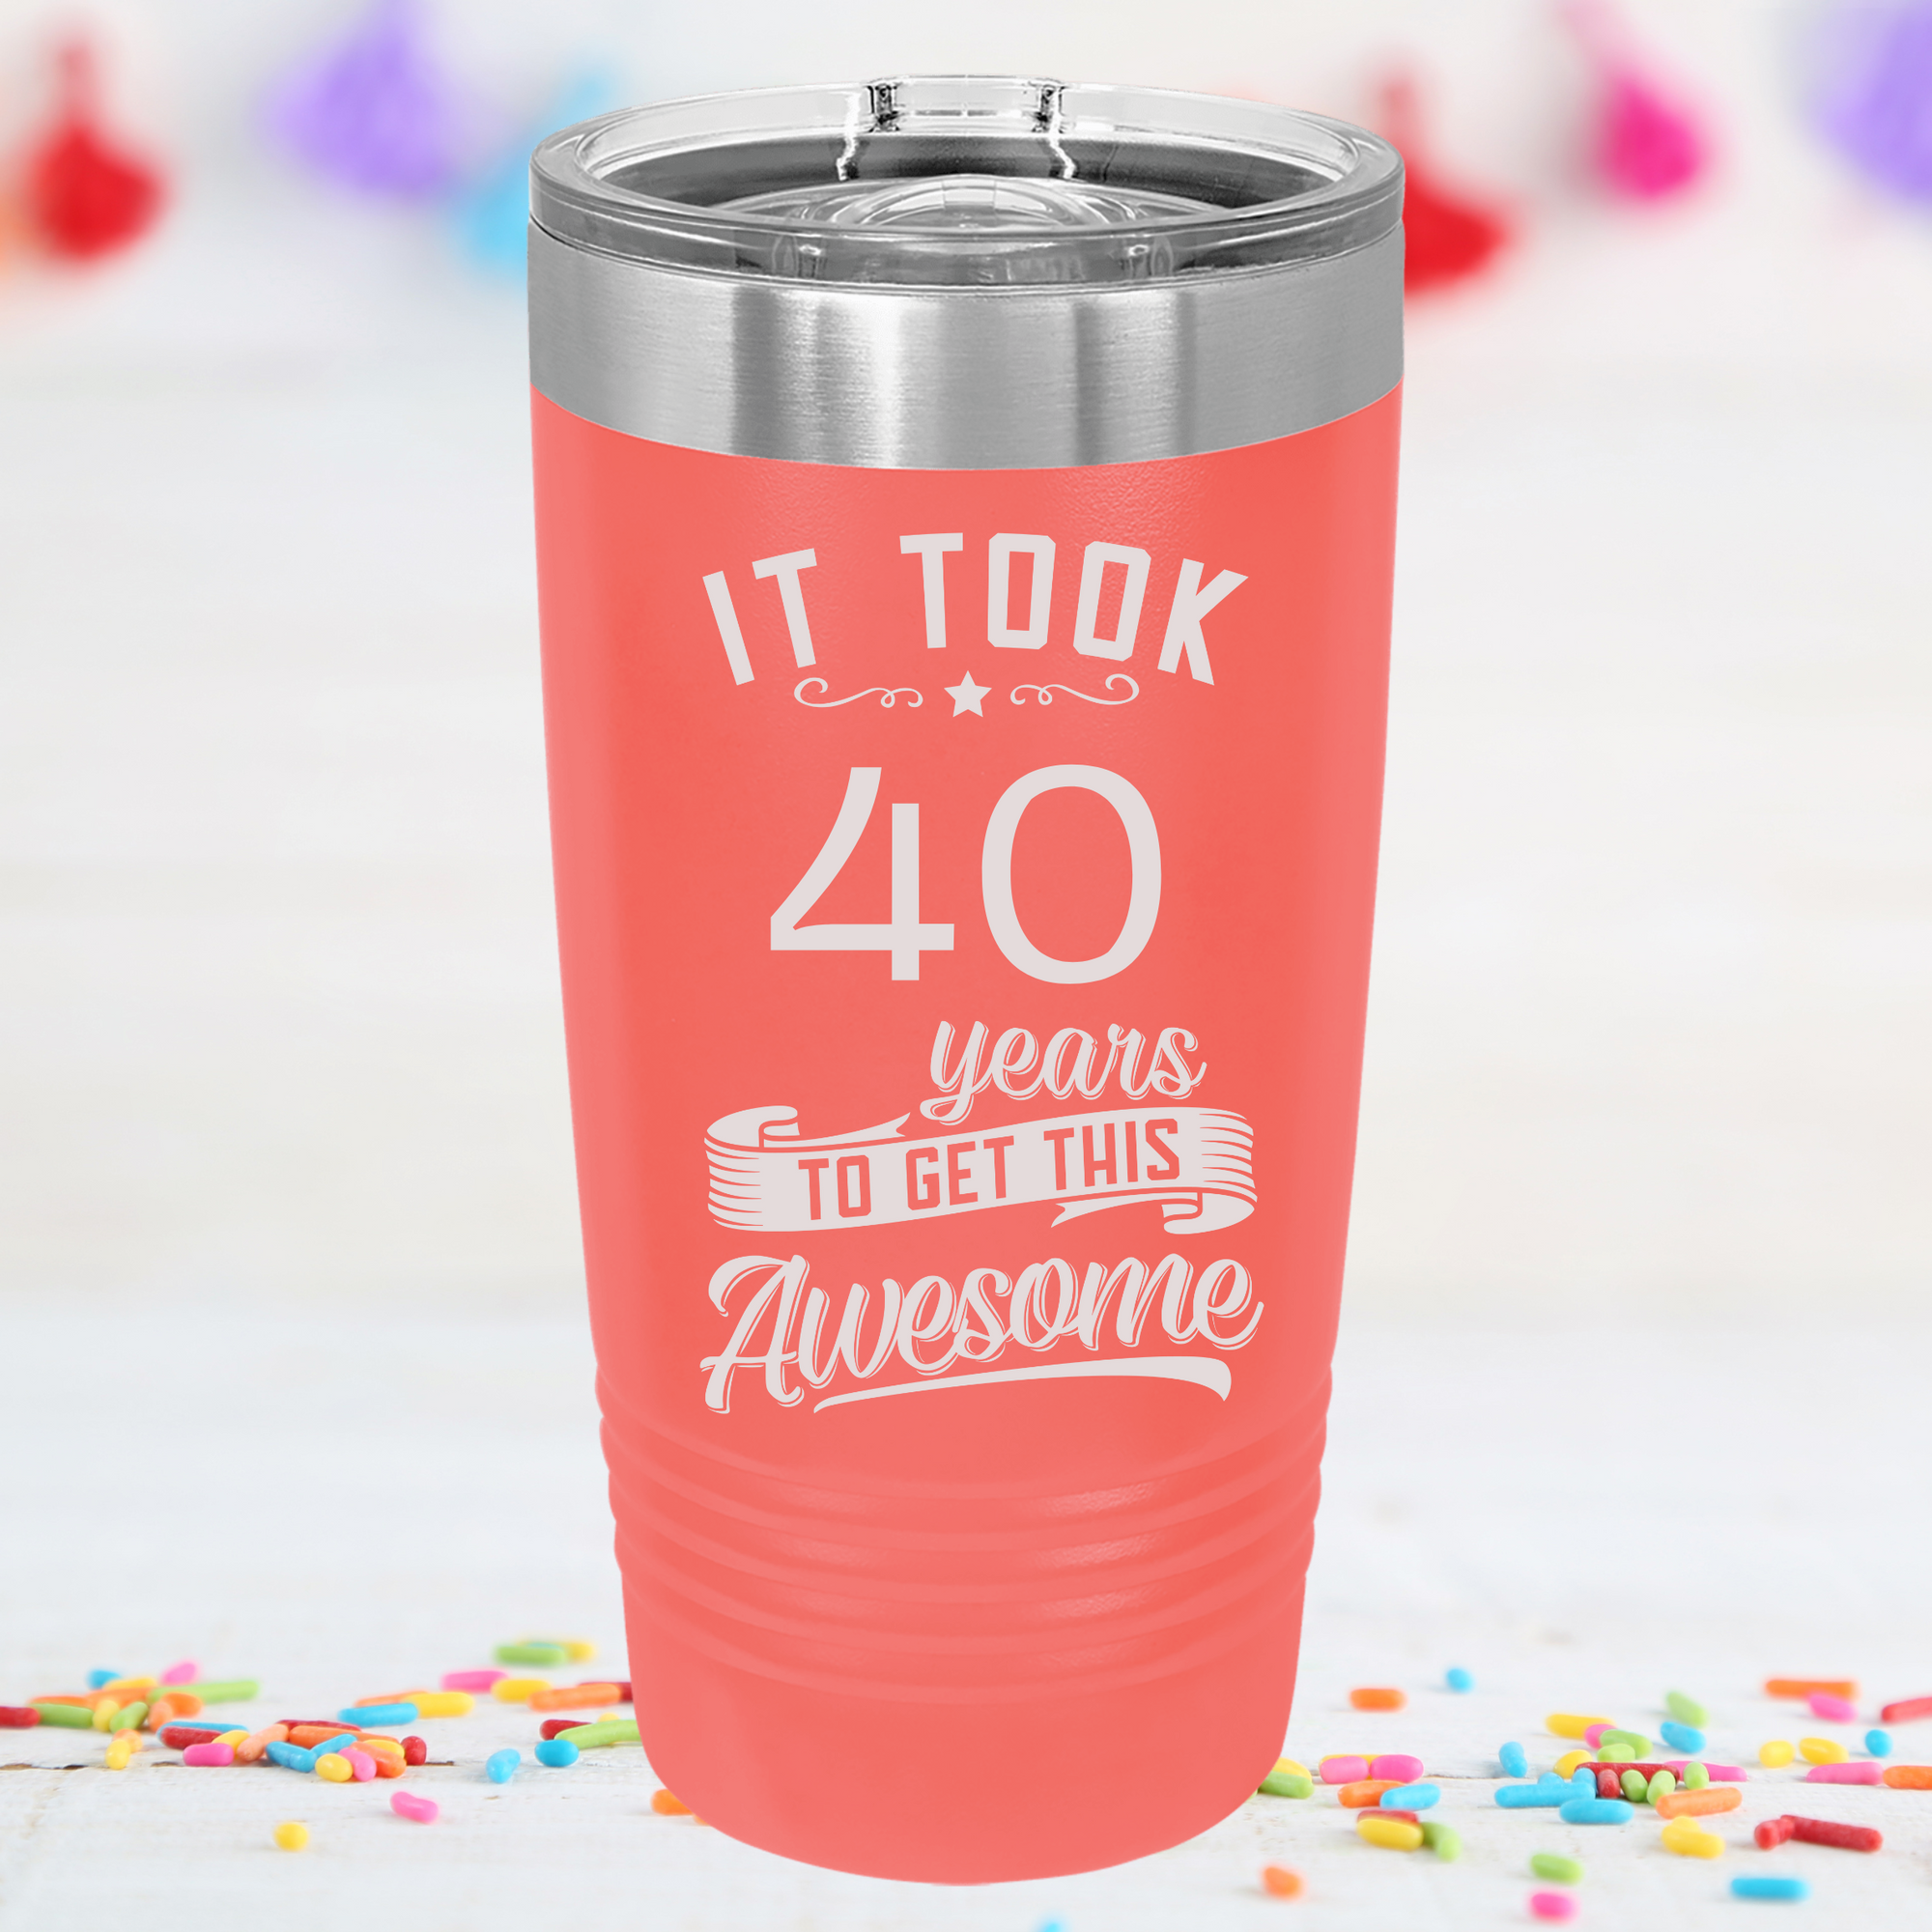 Personalized Tumbler 20 OZ Custom Travel Tumbler With Lid And Straw Custom  Cup Gifts For Girlfriend Boyfriends Men Personalized Gifts For Women Girls